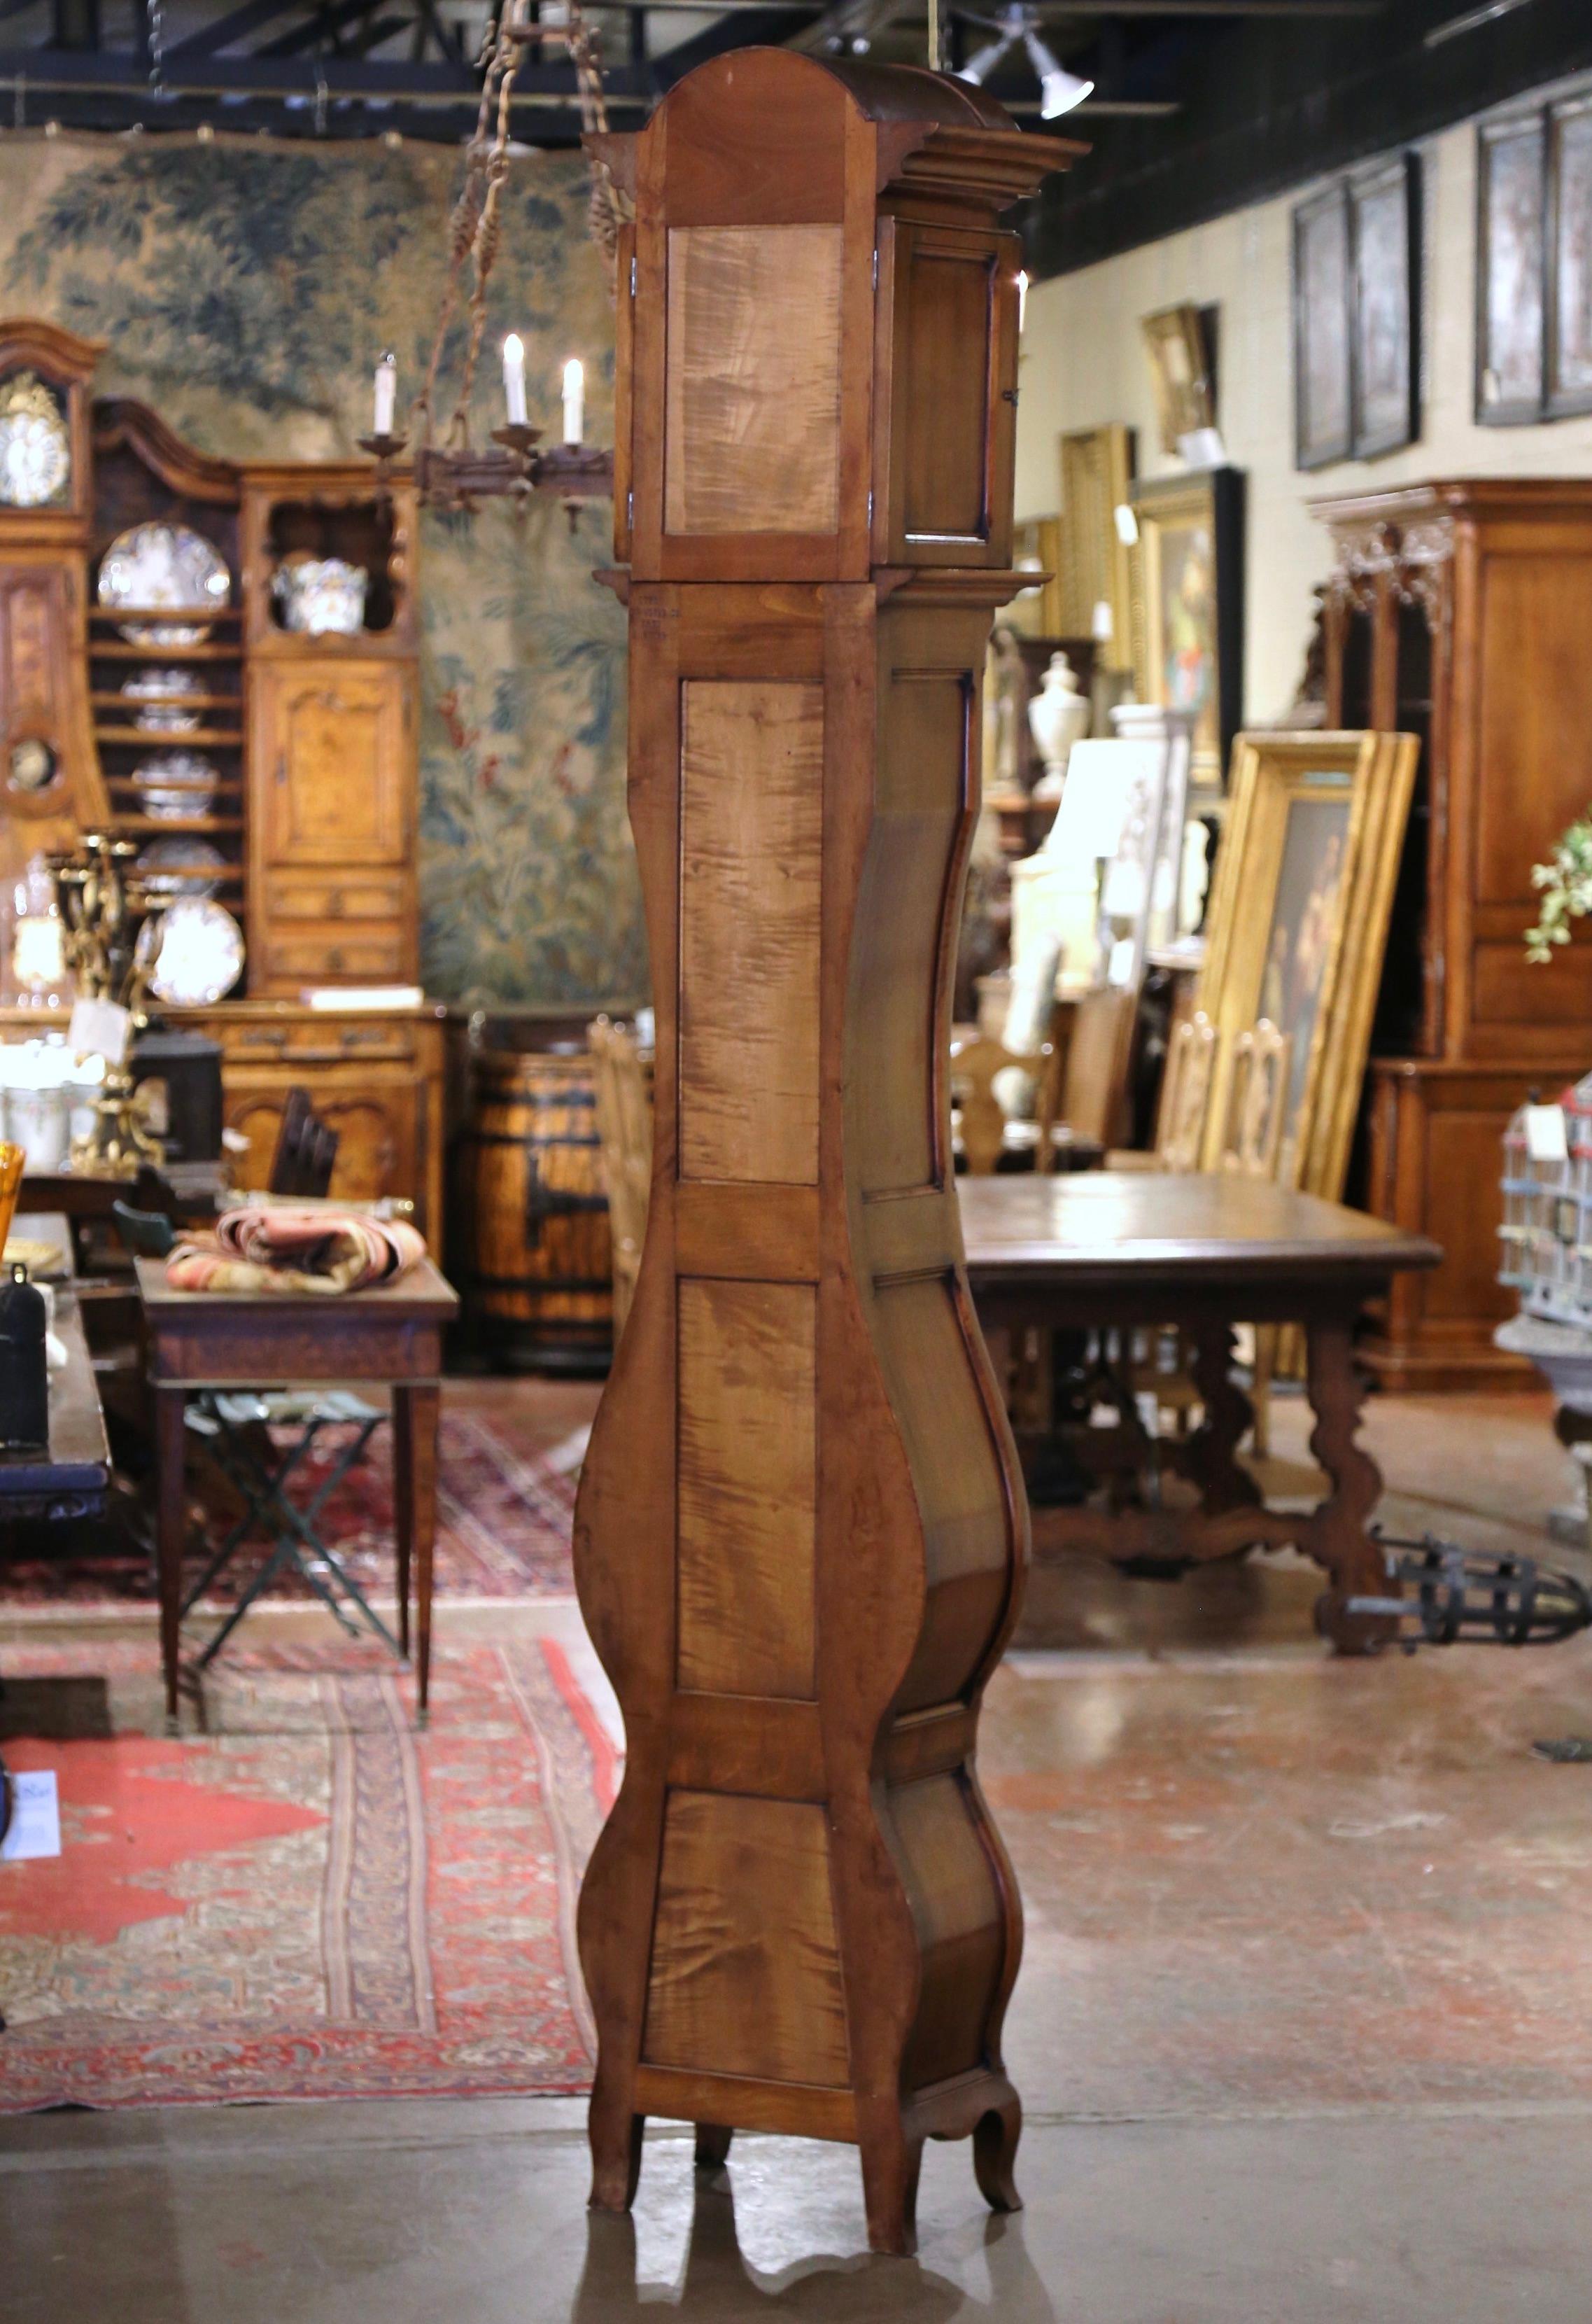 20th Century French Louis XV Carved Burl Wood Grandfather Clock from Lyon Region For Sale 6